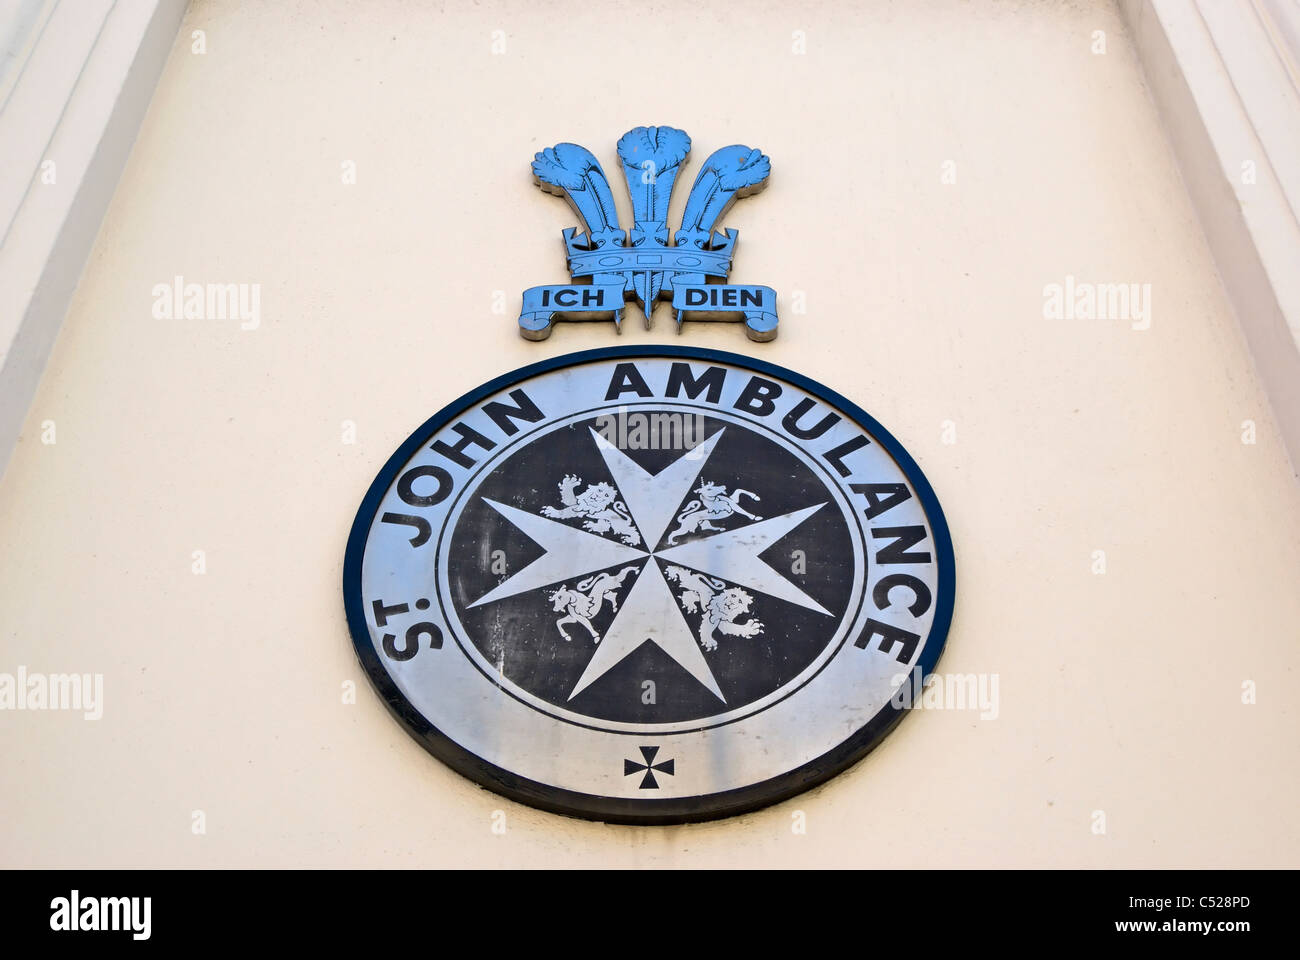 st john ambulance service logo beneath prince of wales feathers with motto 'ich dien', or 'I serve' Stock Photo